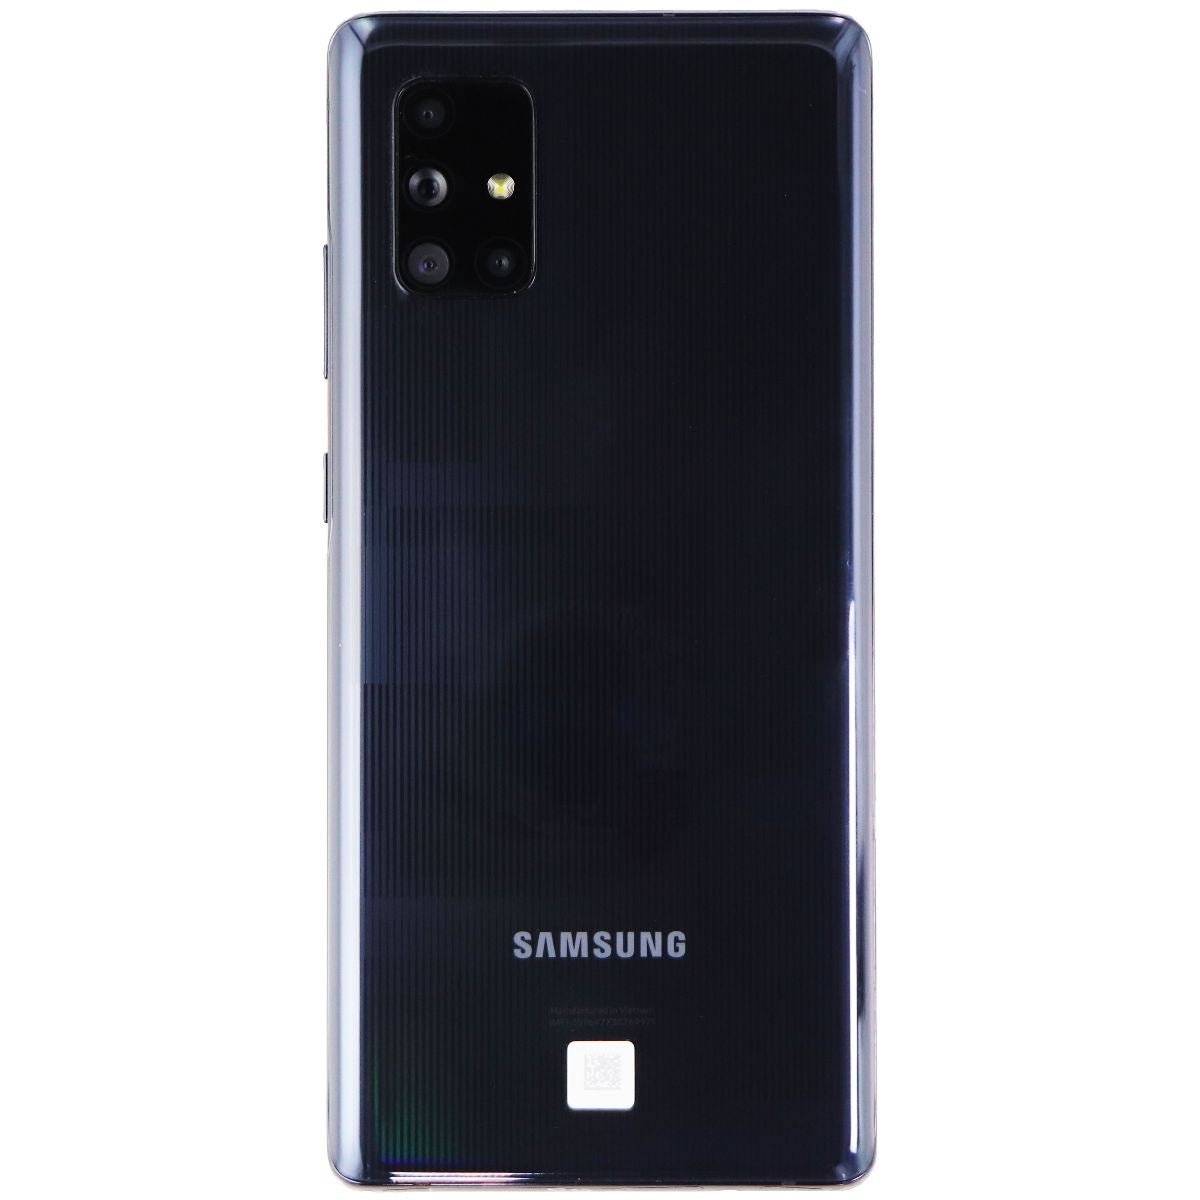 Samsung Galaxy A71 5G UW Smartphone with 128GB (SM-A716V) Verizon - Prism Black Cell Phones & Smartphones Samsung    - Simple Cell Bulk Wholesale Pricing - USA Seller